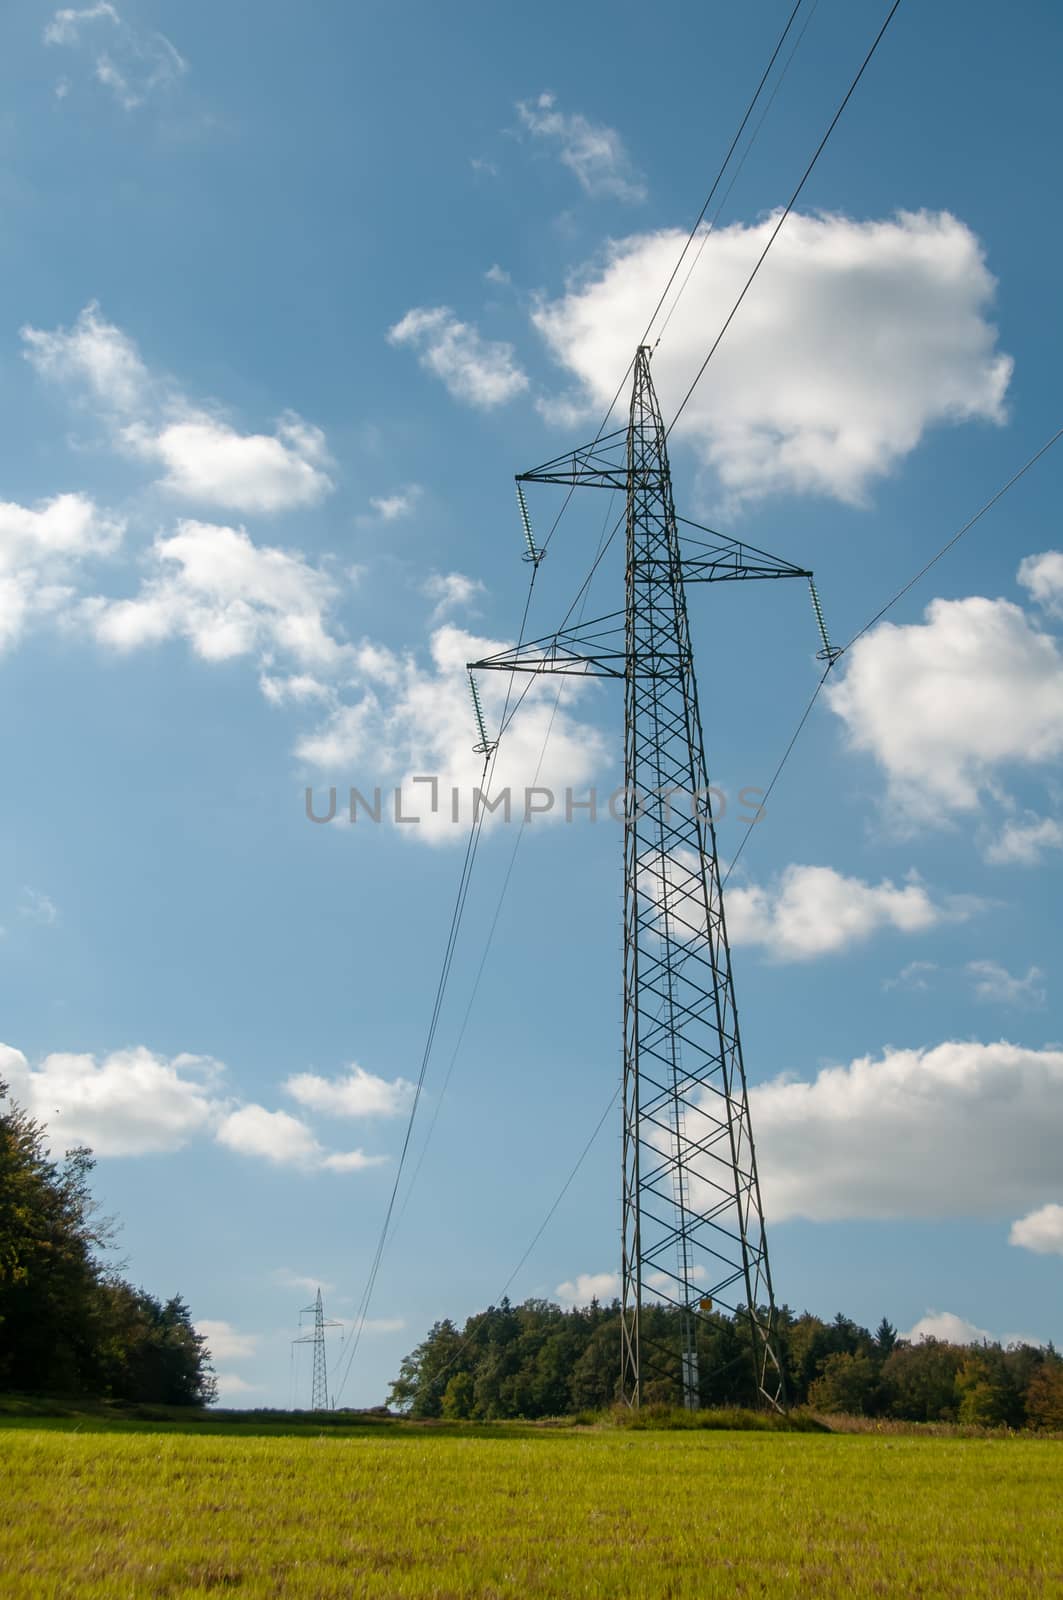 High voltage lines and power pylons innatural landscape on blue sky with puffy clouds by asafaric